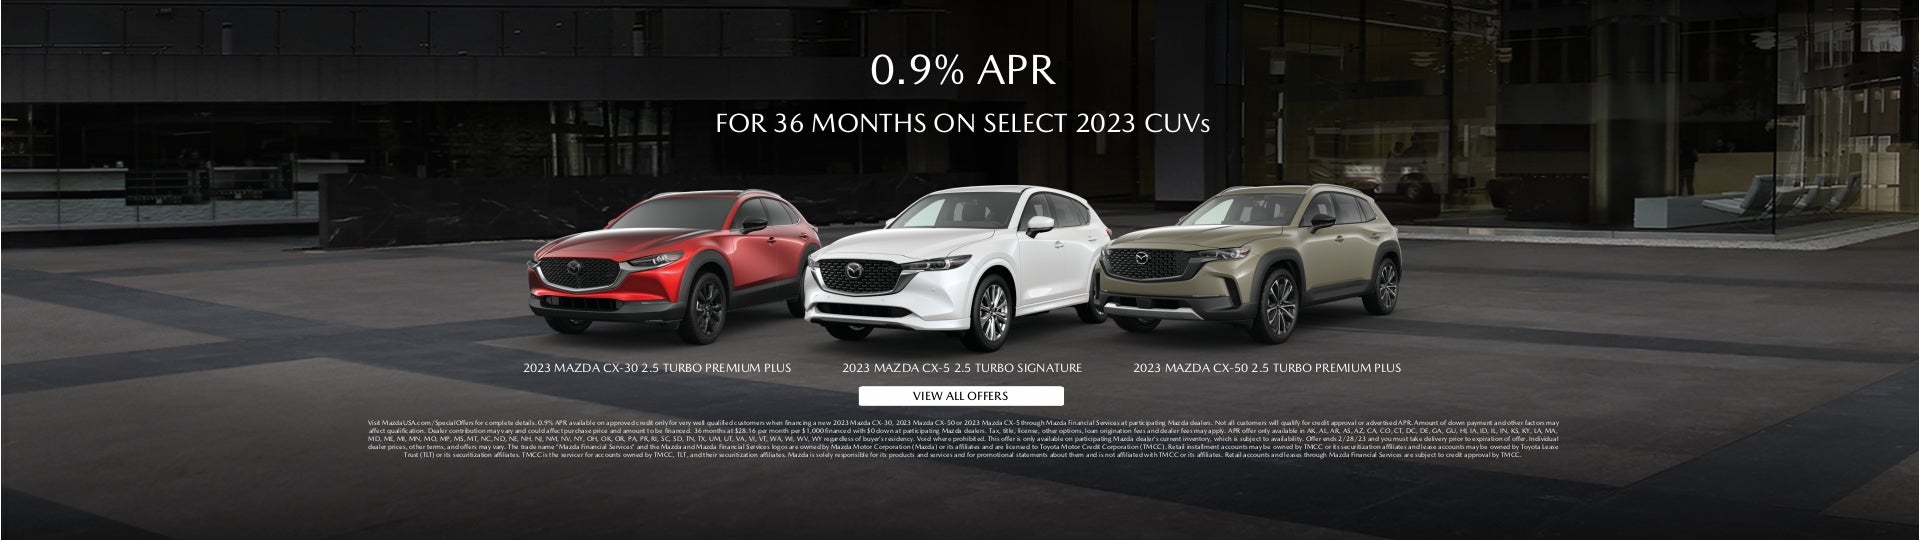 0.9% APR for 36 months on select SUV's